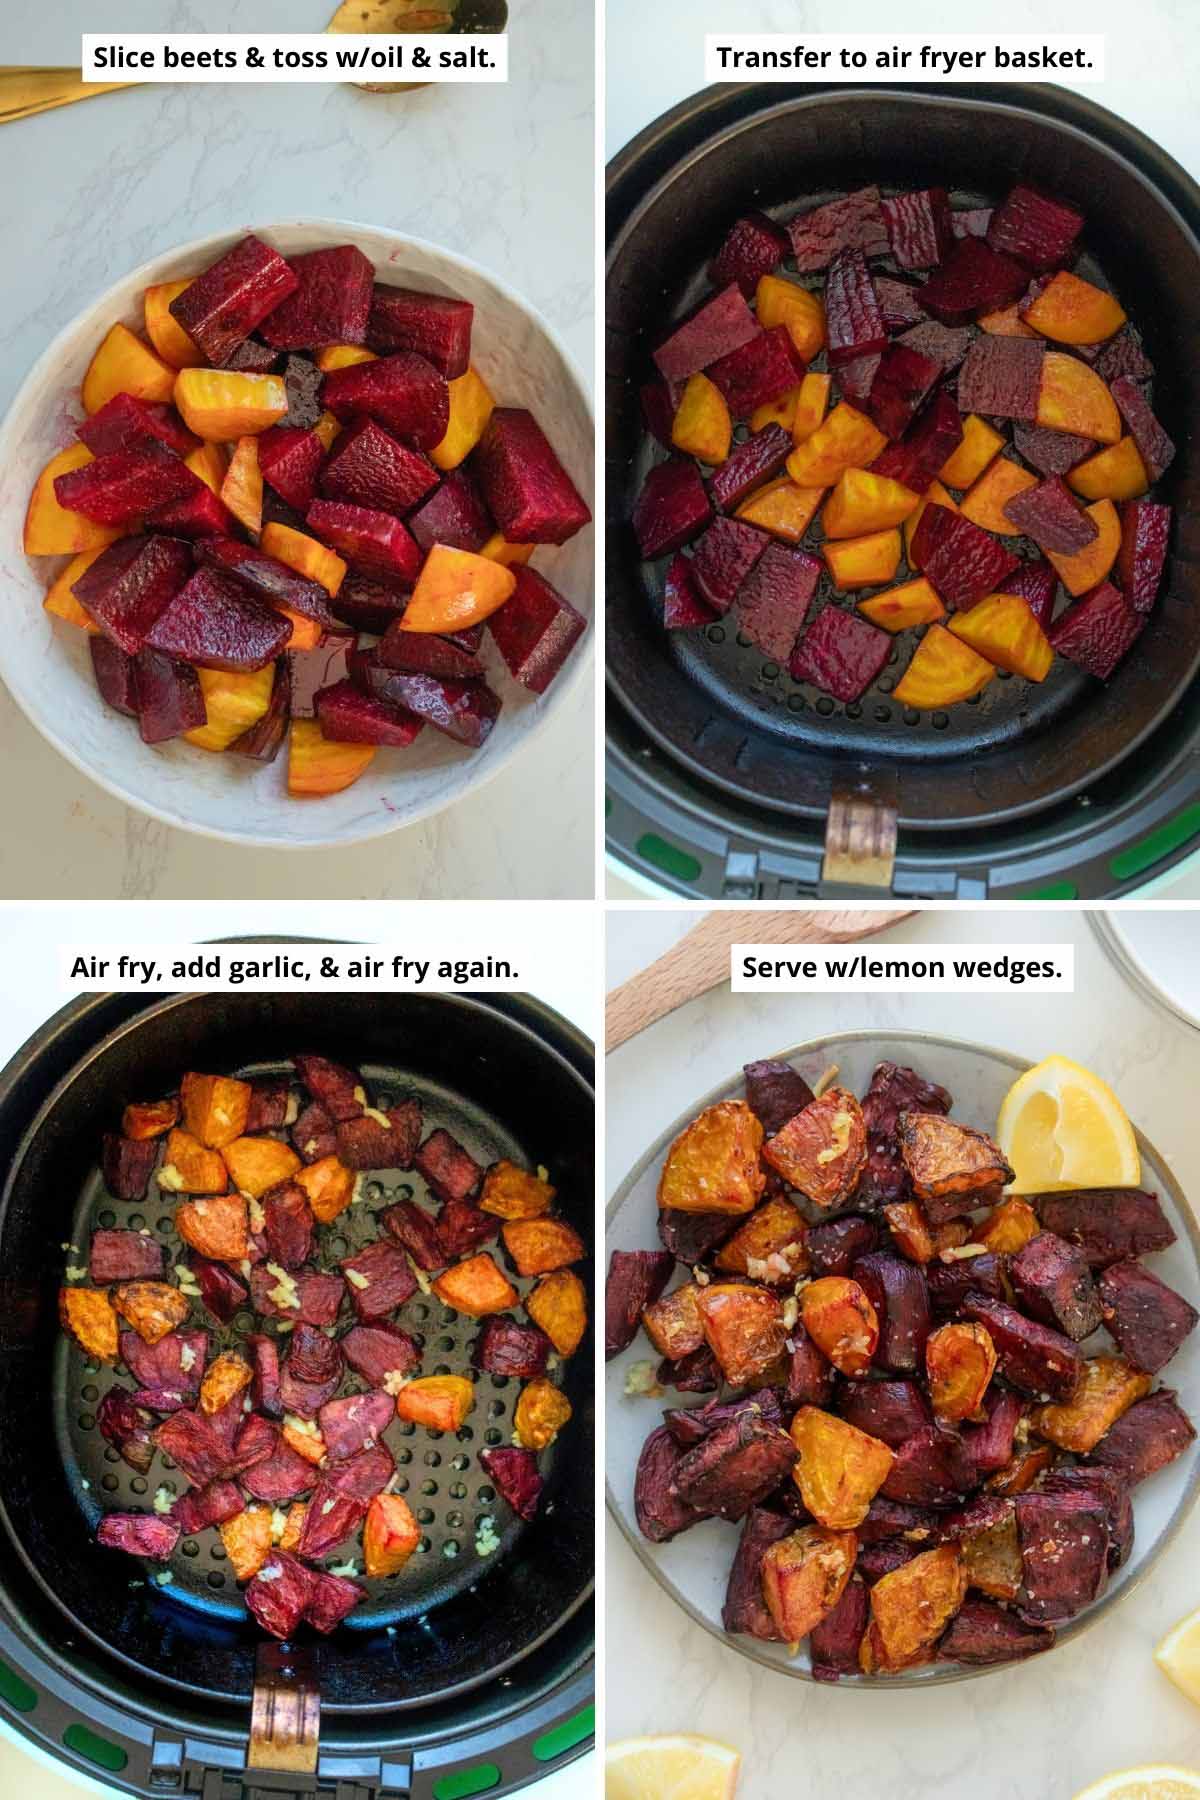 image collage showing the beets tossed with oil and garlic in the mixing bowl and in the air fryer, adding the garlic to the cooked beets, and the air fryer beets on a serving plate after roasting with the garlic